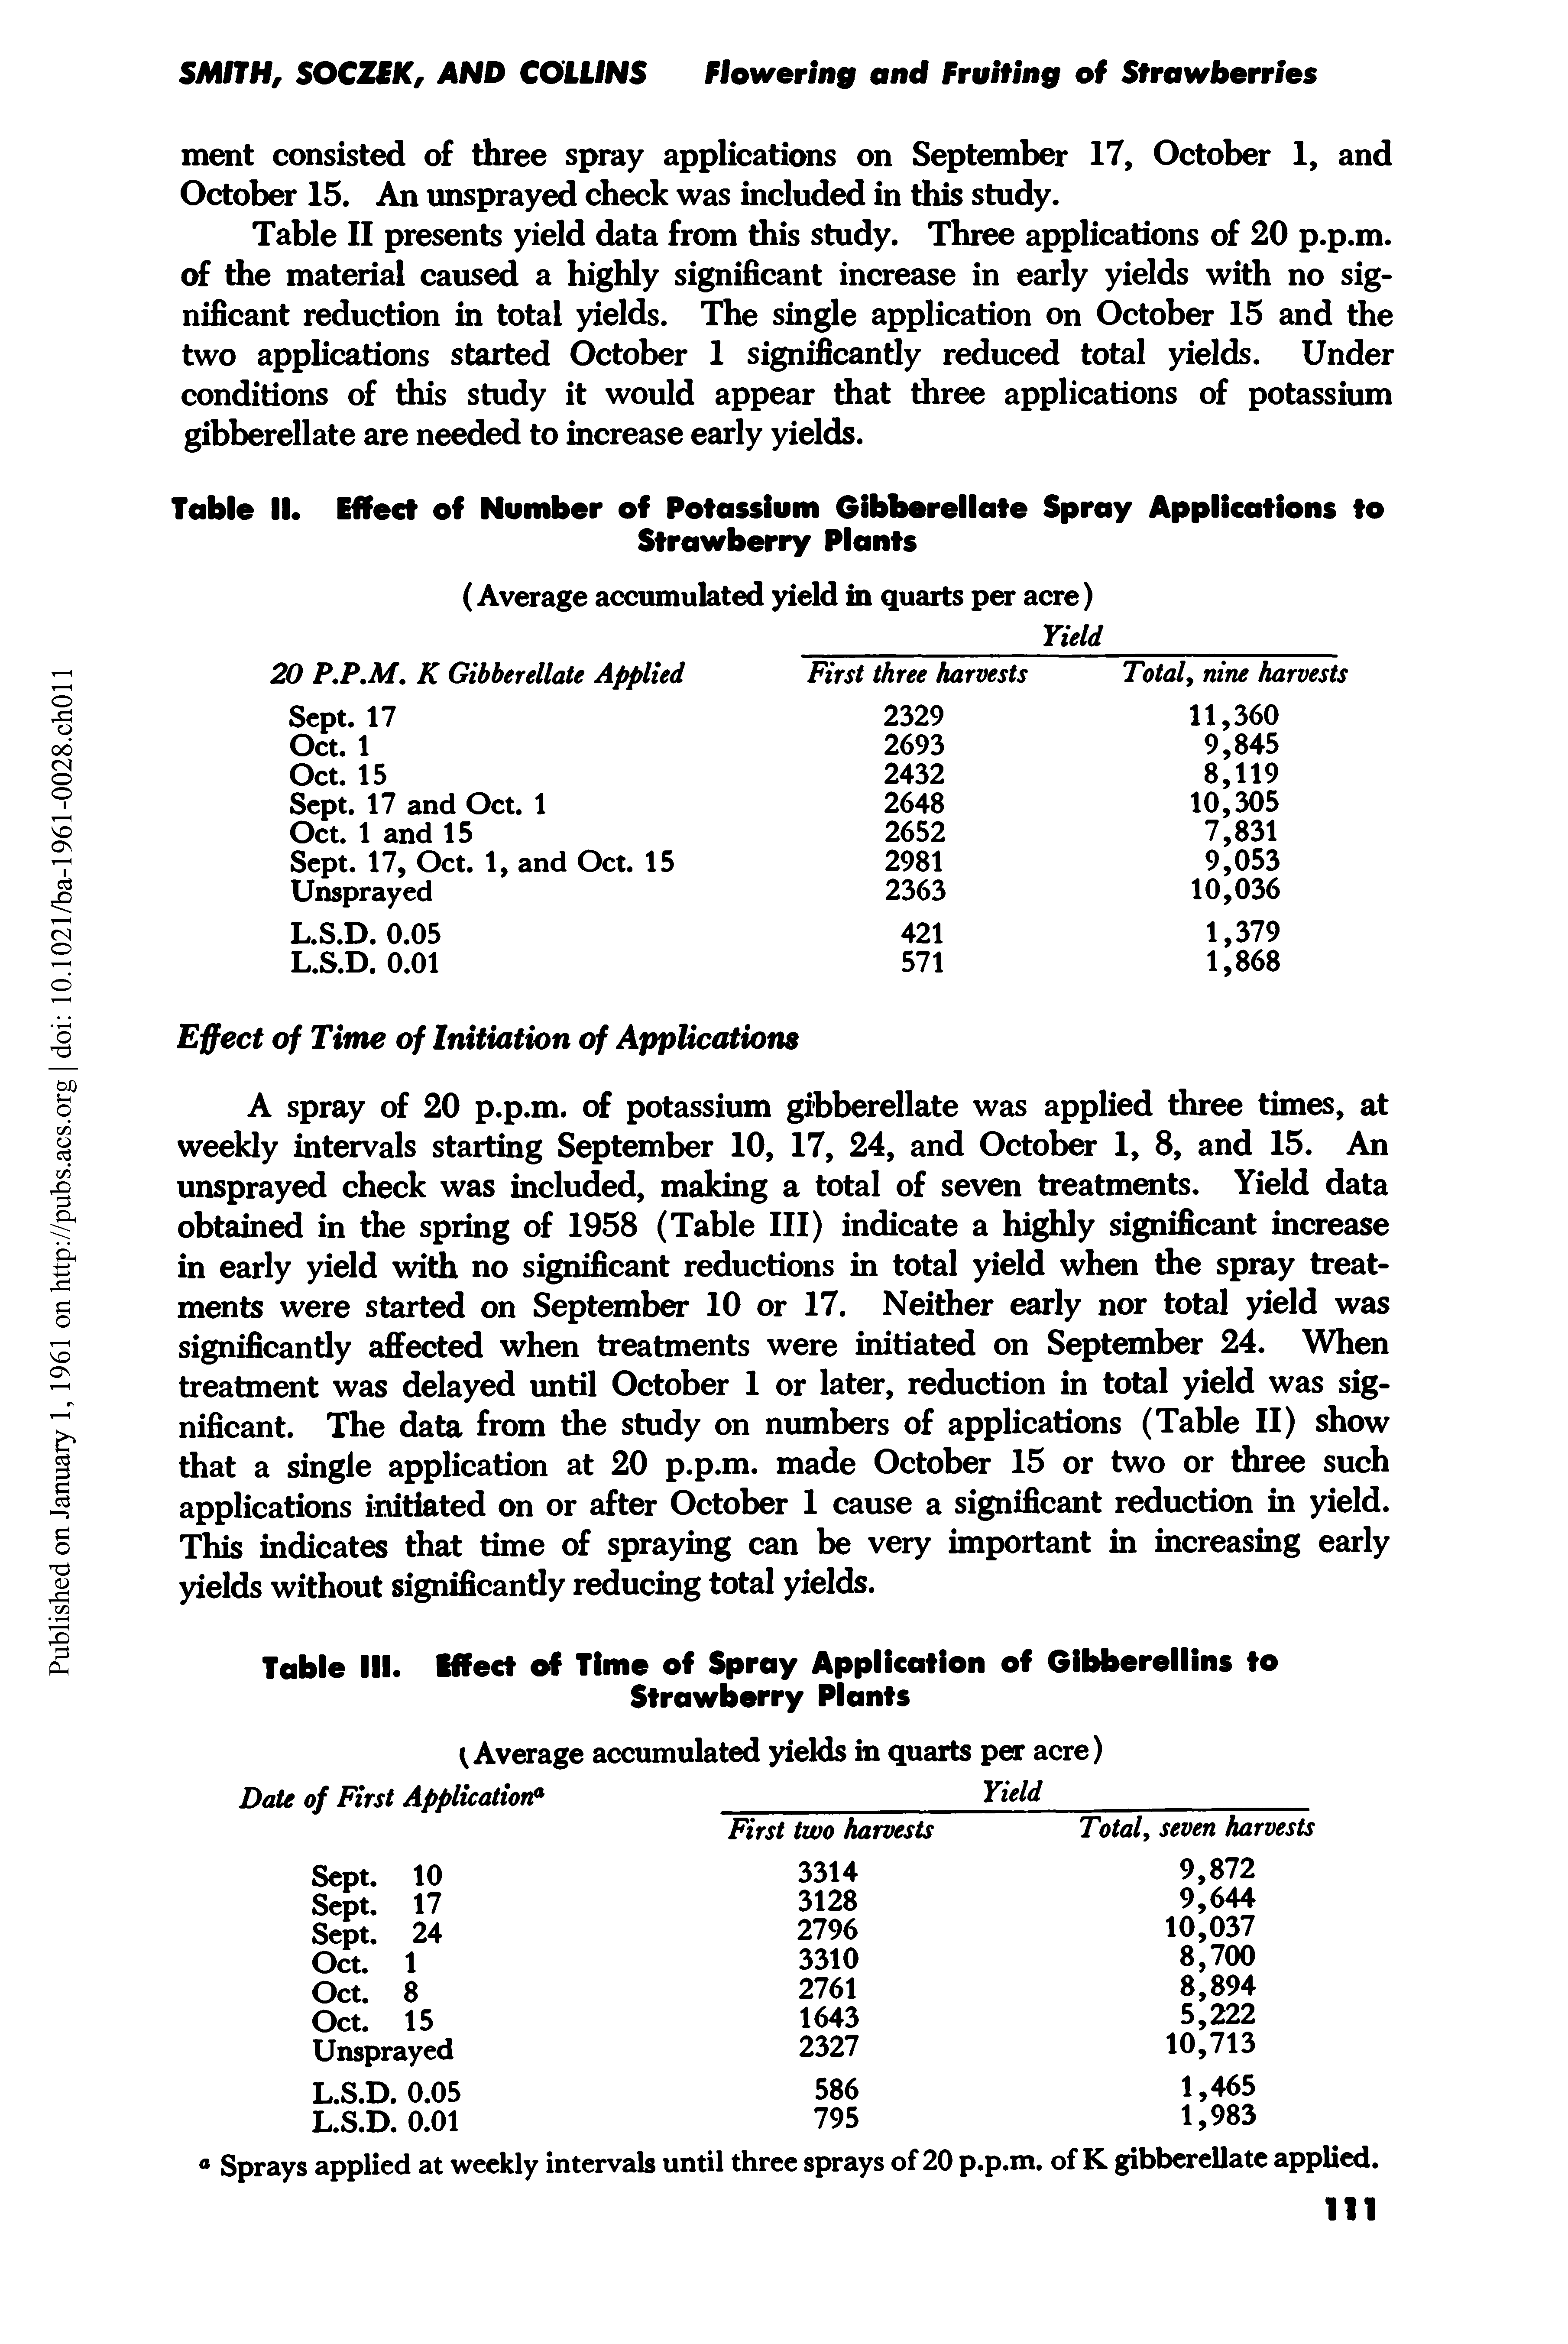 Table II presents yield data from this study. Three applications of 20 p.p.m. of the material caused a highly significant increase in early yields with no significant reduction in total yields. The single application on October 15 and the two applications started October 1 significantly reduced total yields. Under conditions of this study it would appear that three applications of potassium gibberellate are needed to increase early yields.